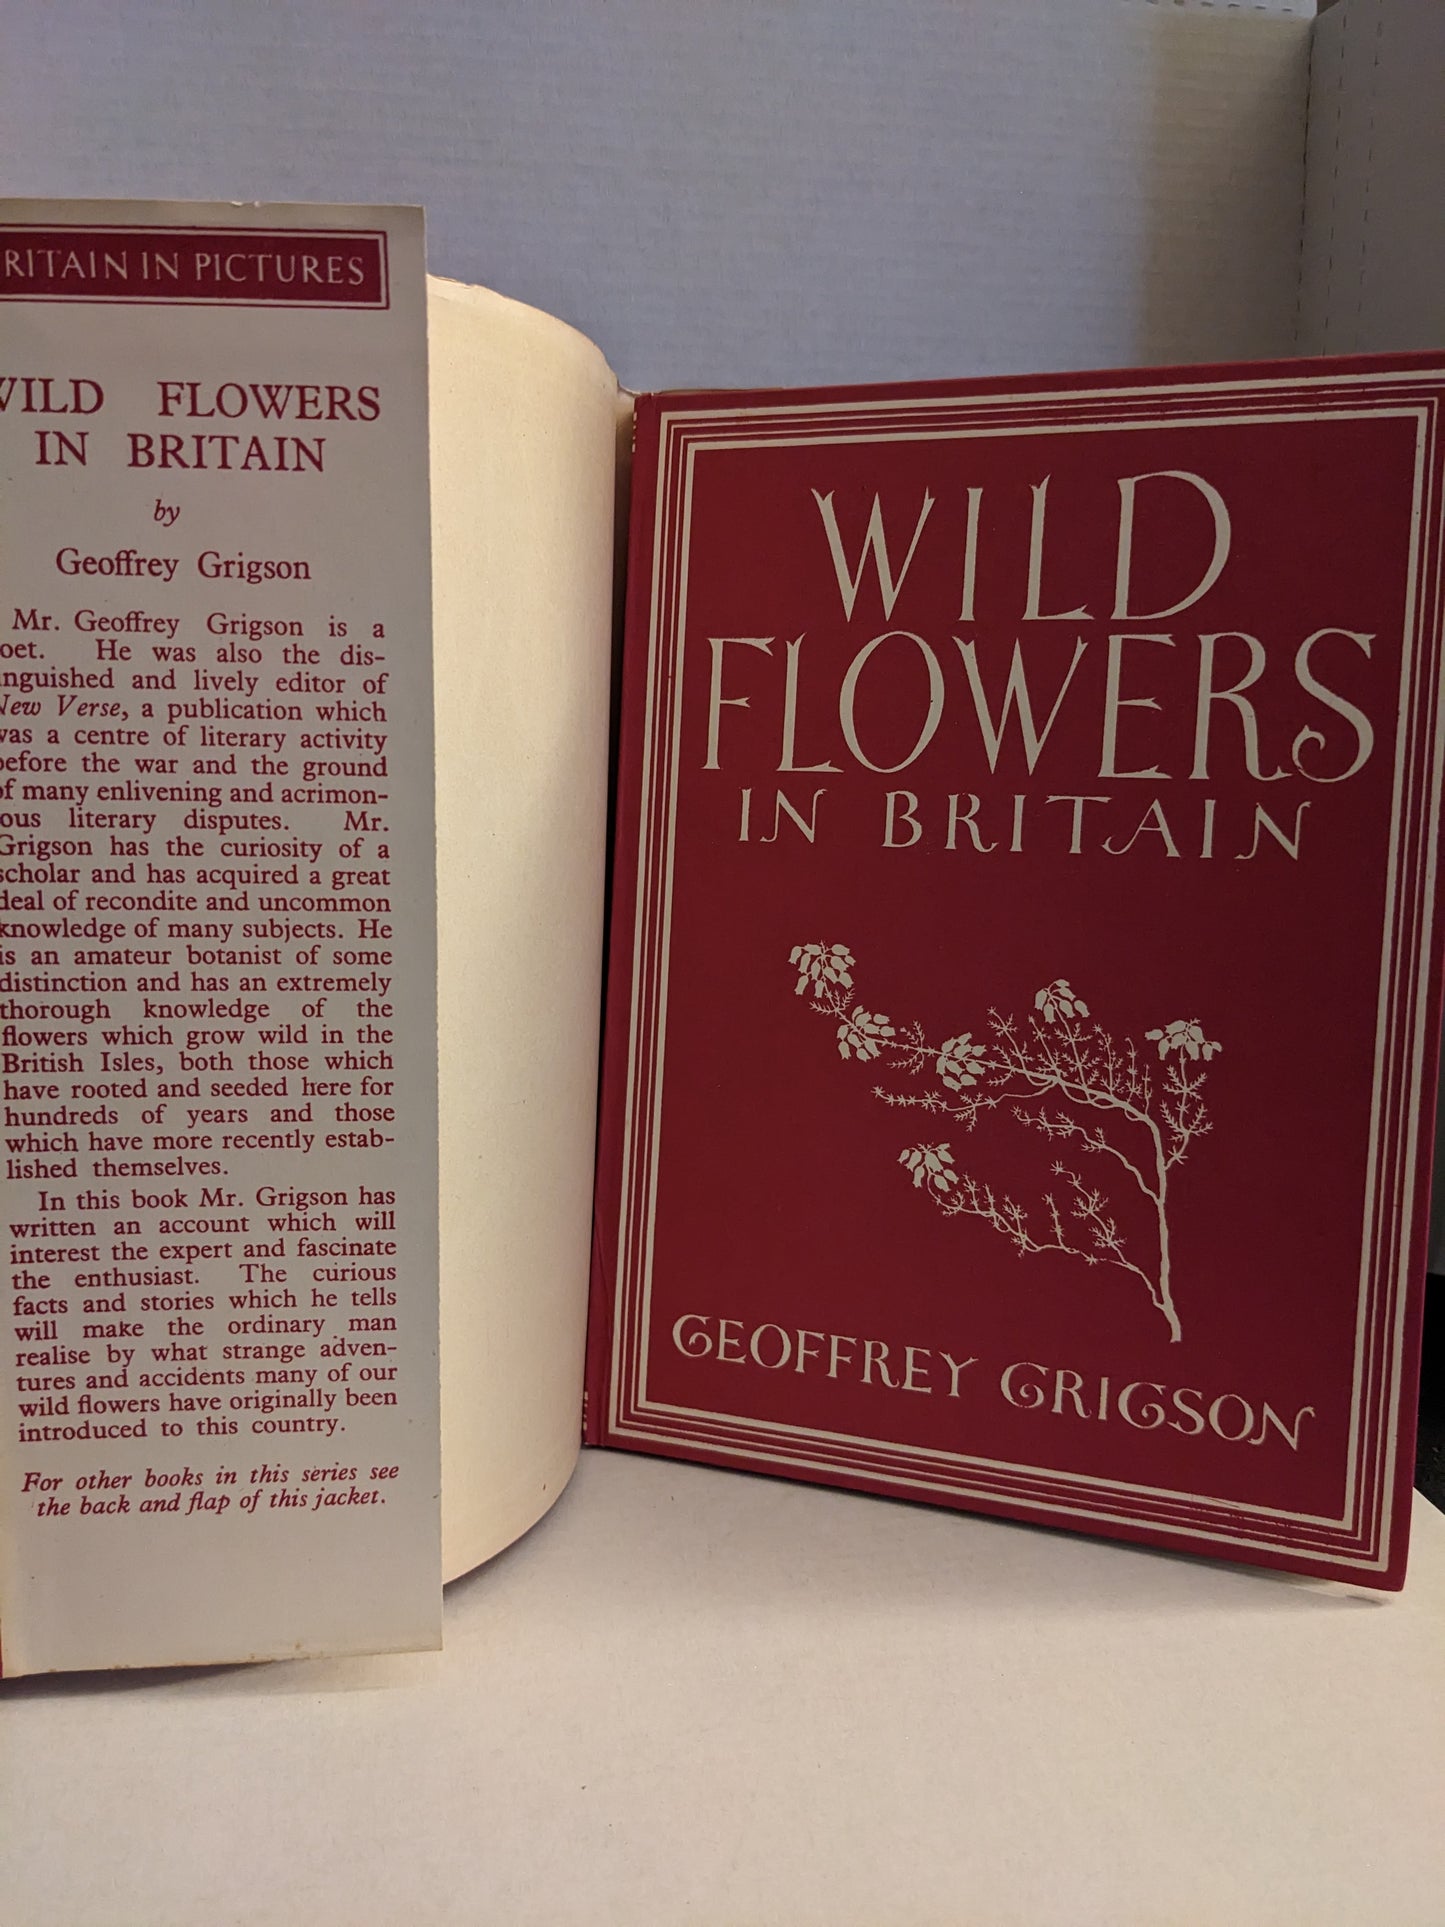 Wild Flowers in Britain (Britain in pictures) Hardcover – January 1, 1948